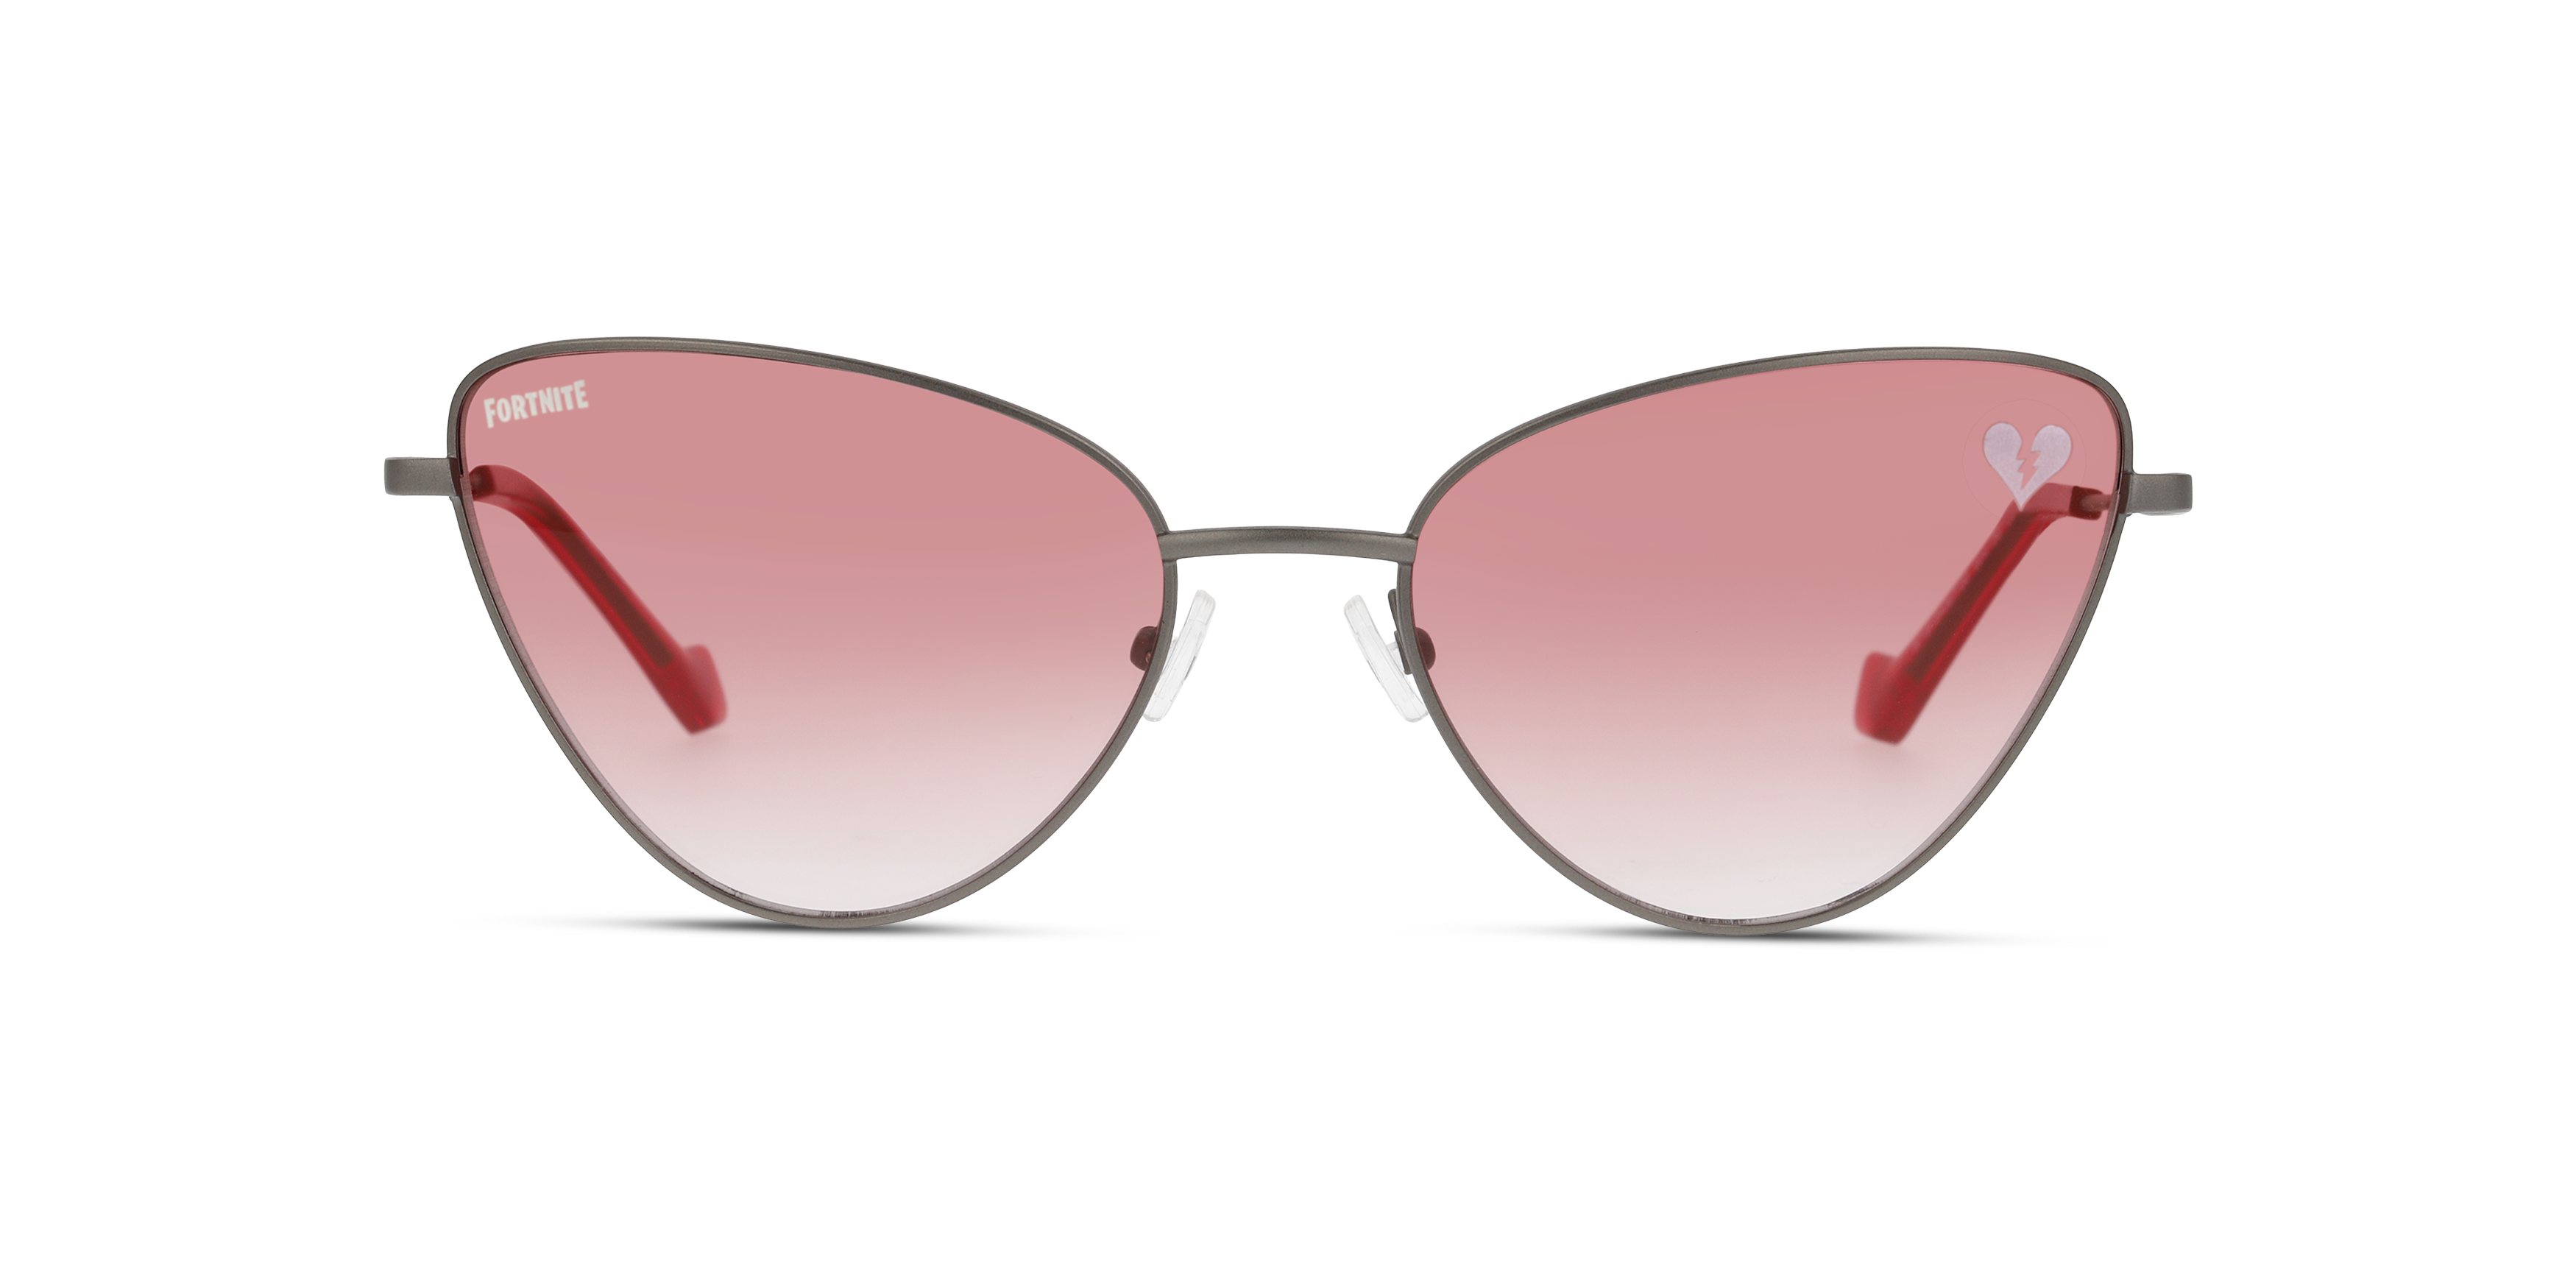 Front Fortnite with Unofficial UNSF0199 (GGP0) Sunglasses Pink / Grey